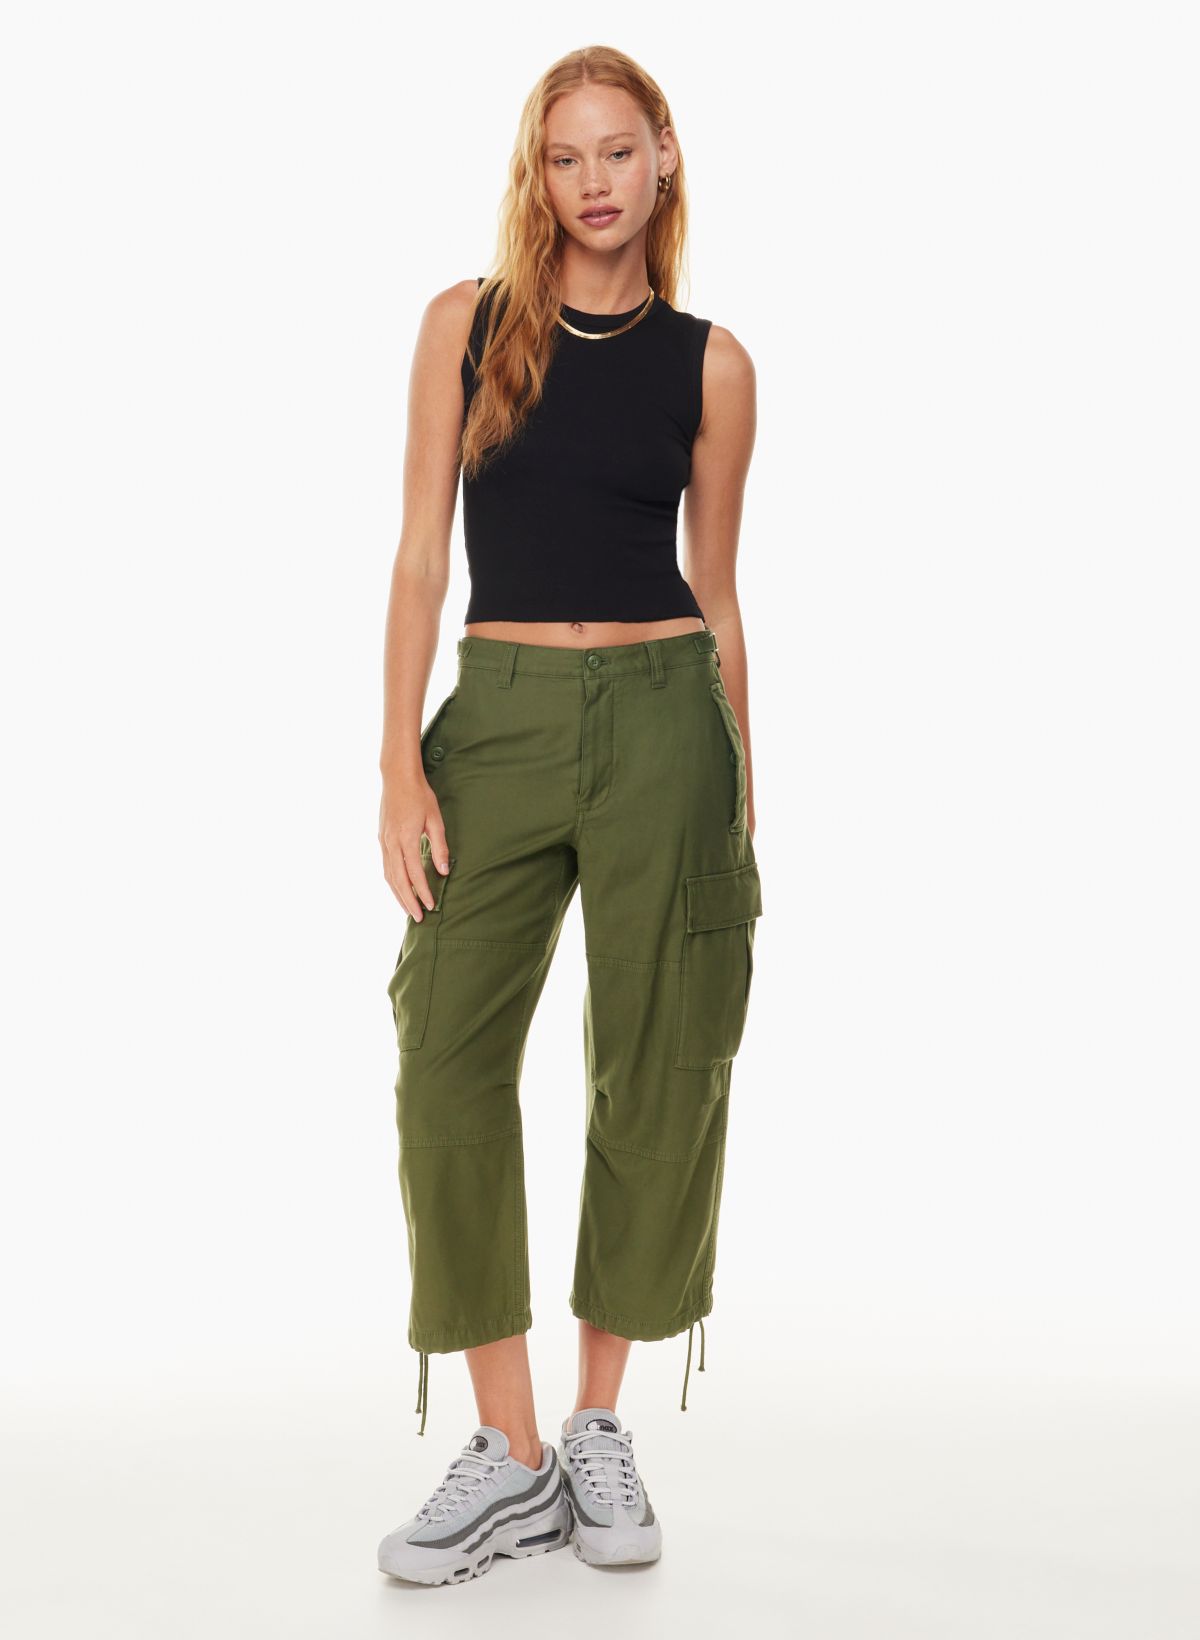 High Waist Solid Cargo Pants  Mint green pants outfit, Green